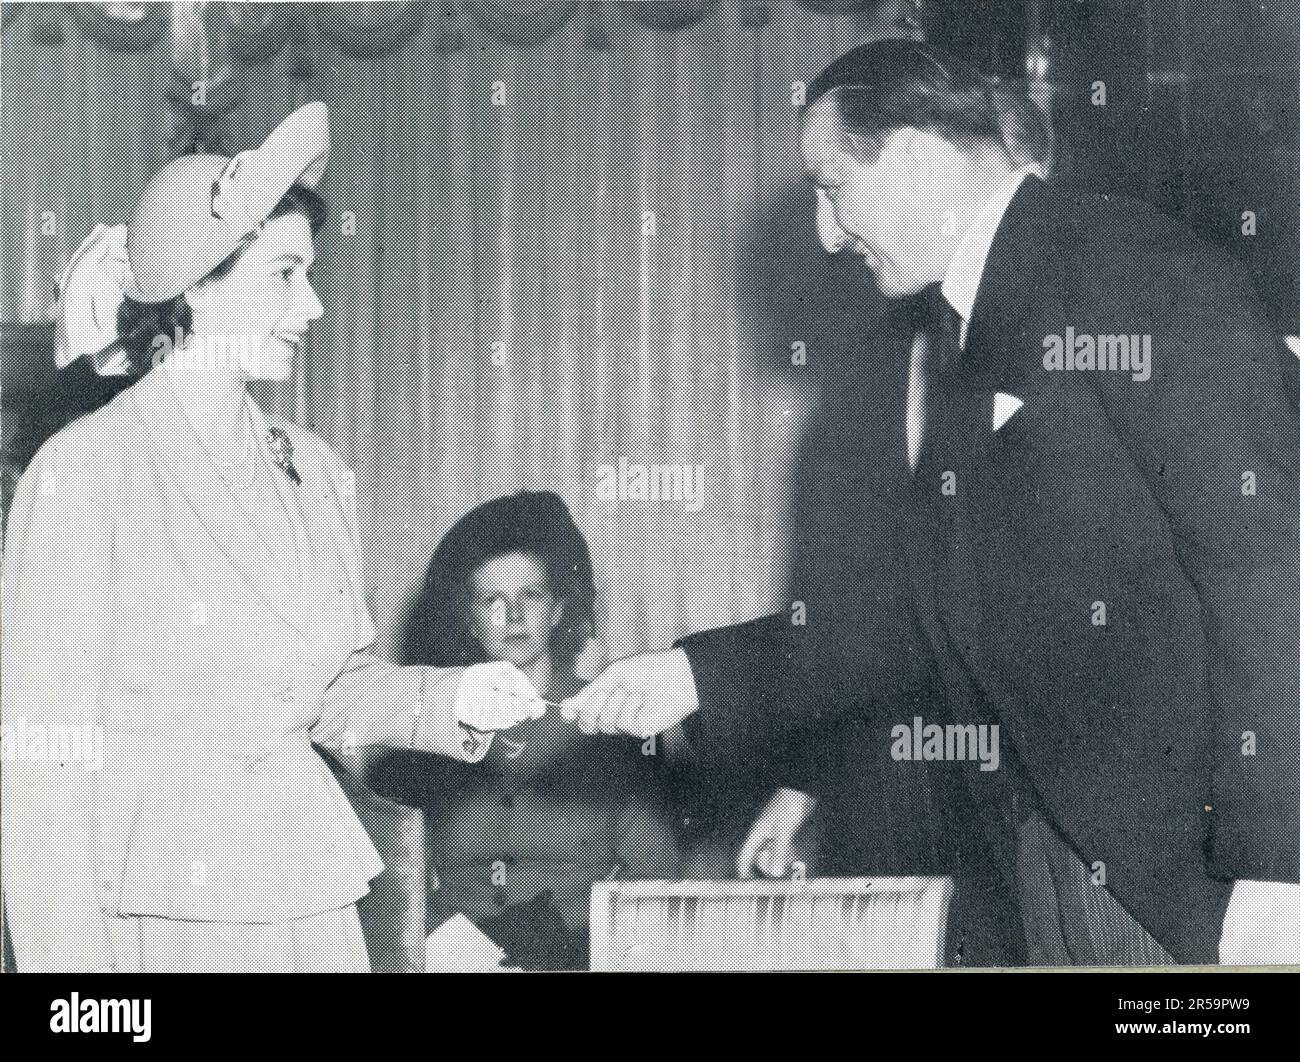 Princess Elizabeth (future Queen Elizabeth 2nd) being presented with a cheque for 21K by J Arthur Rank of the National Society for Prevention of Cruelty to Children (NSPCC) of which she is president on 1 June 1948, U.K. Stock Photo